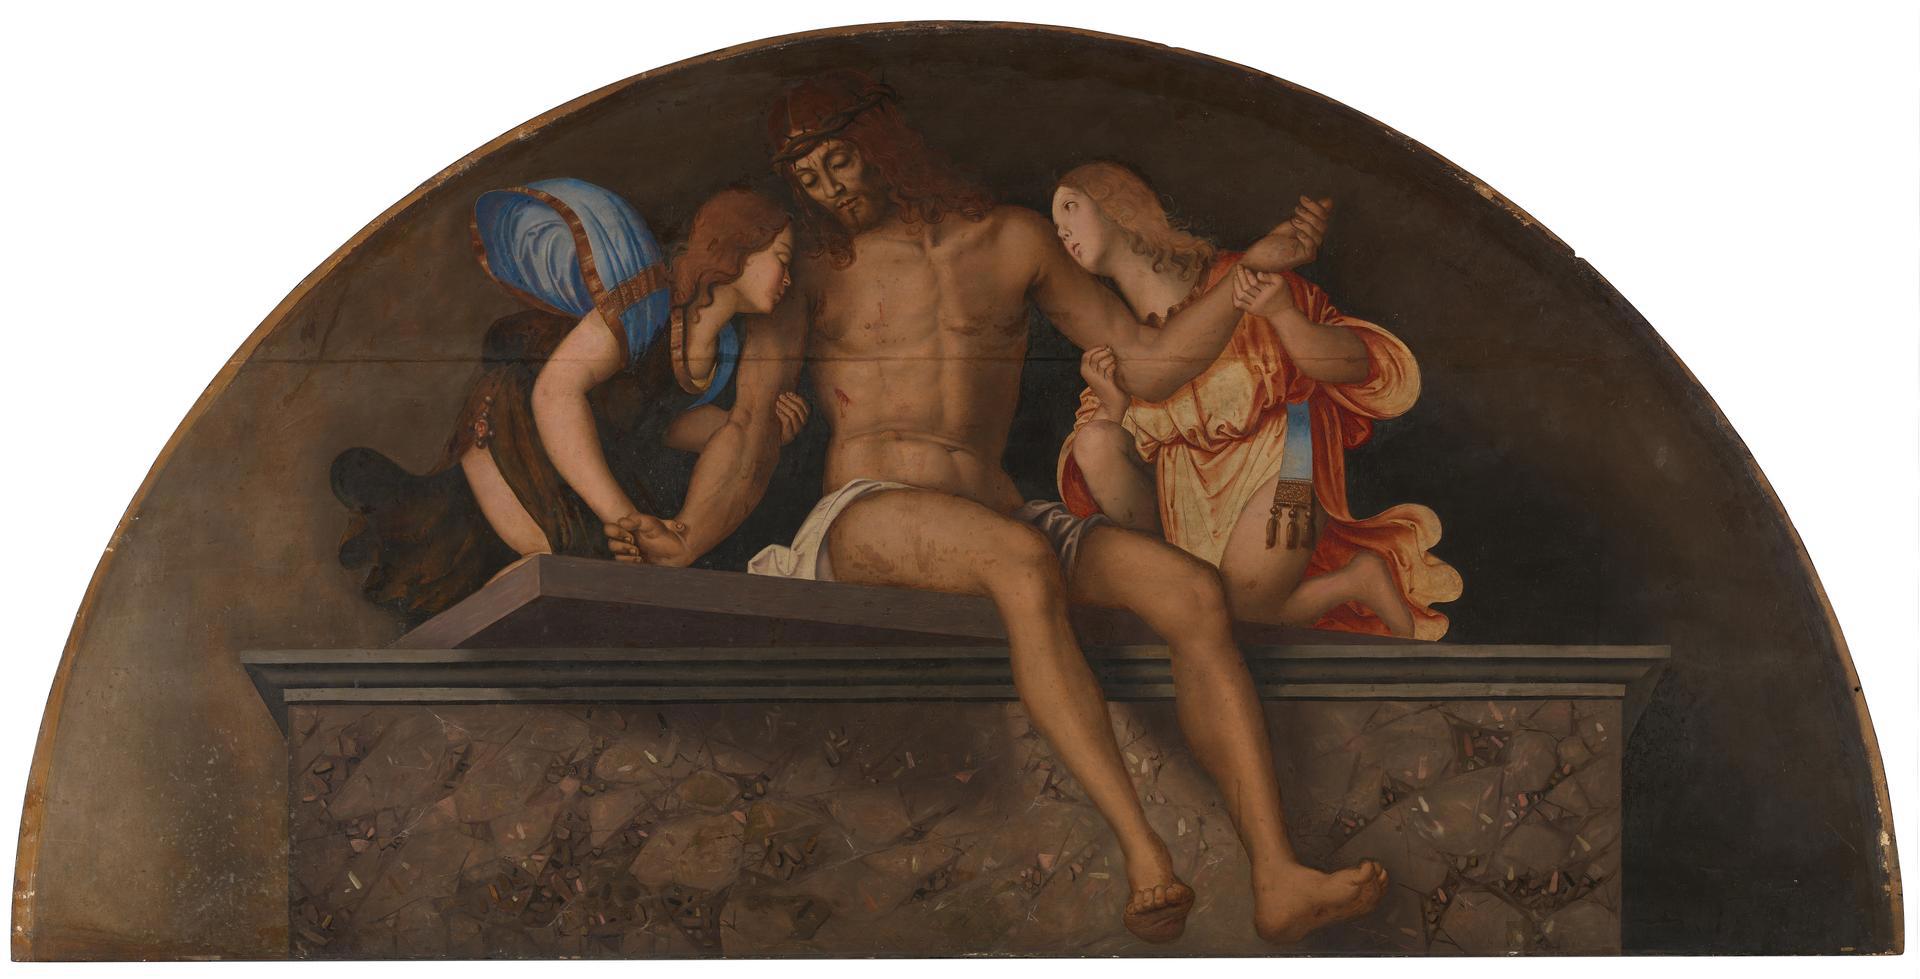 The Dead Christ with Angels by Francesco Zaganelli